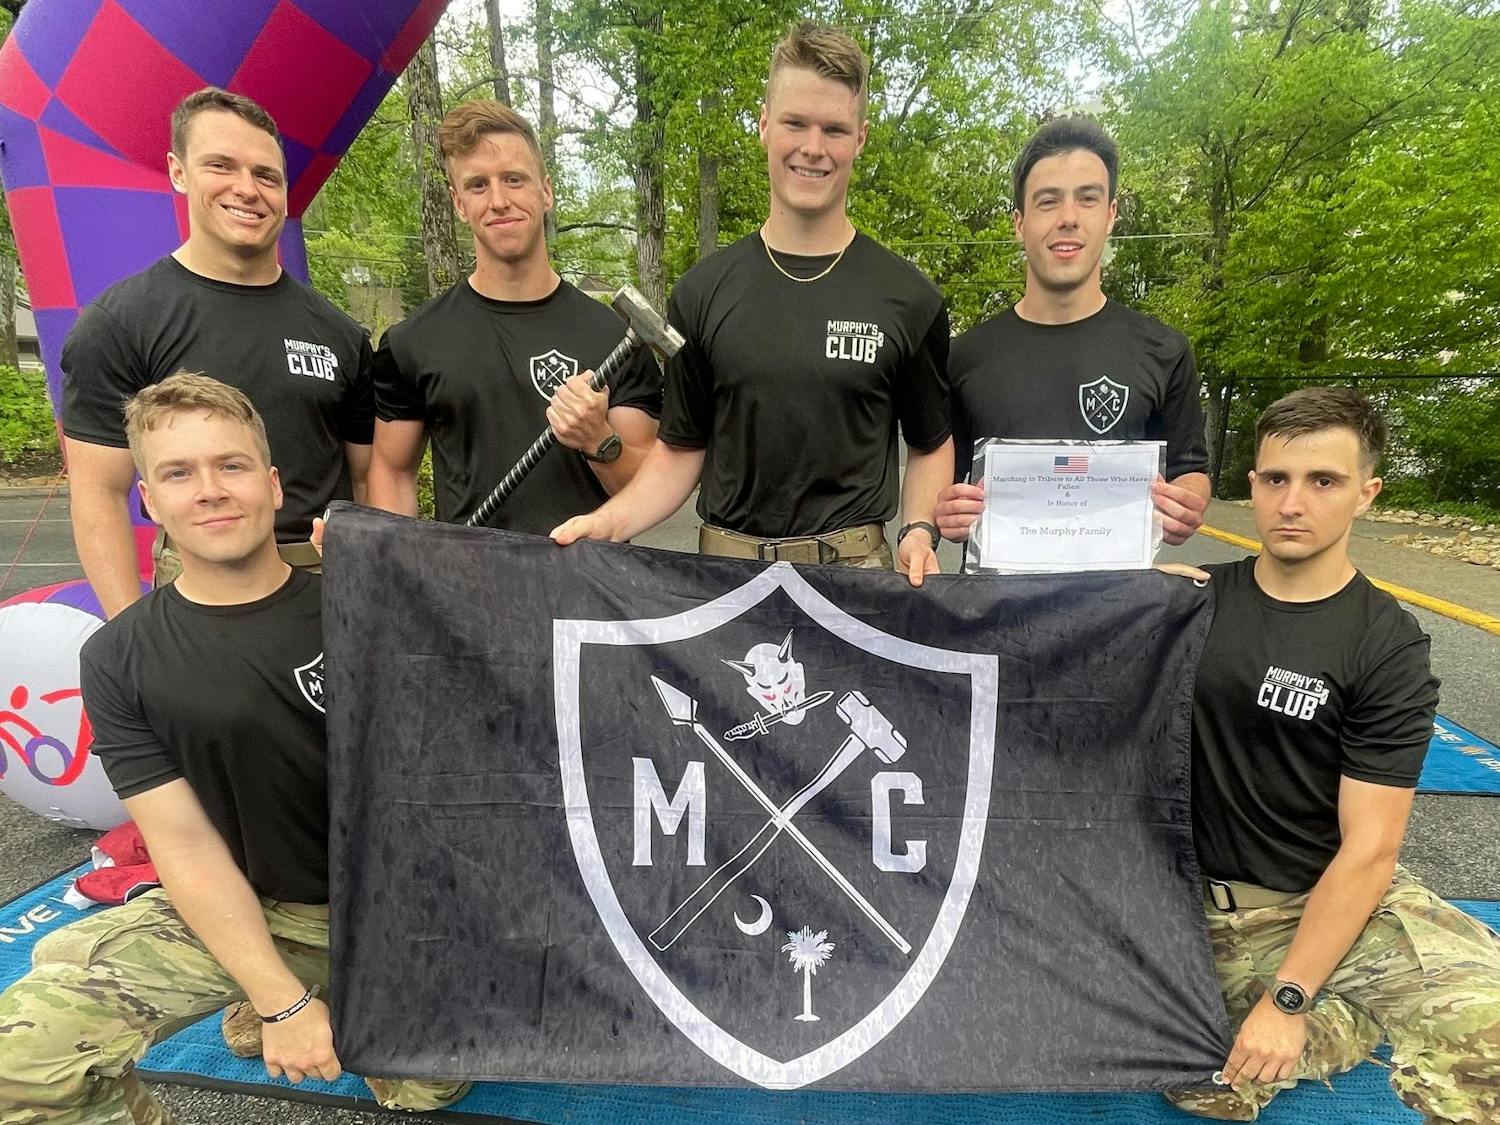 Members of Murphy's Club pose with the organization's flag at the 2023 Mountain Man Memorial March. The group took part in the Mountain Man Memorial March's marathon, where participants ran through the mountains of Tennessee wearing 35 pounds on their backs.